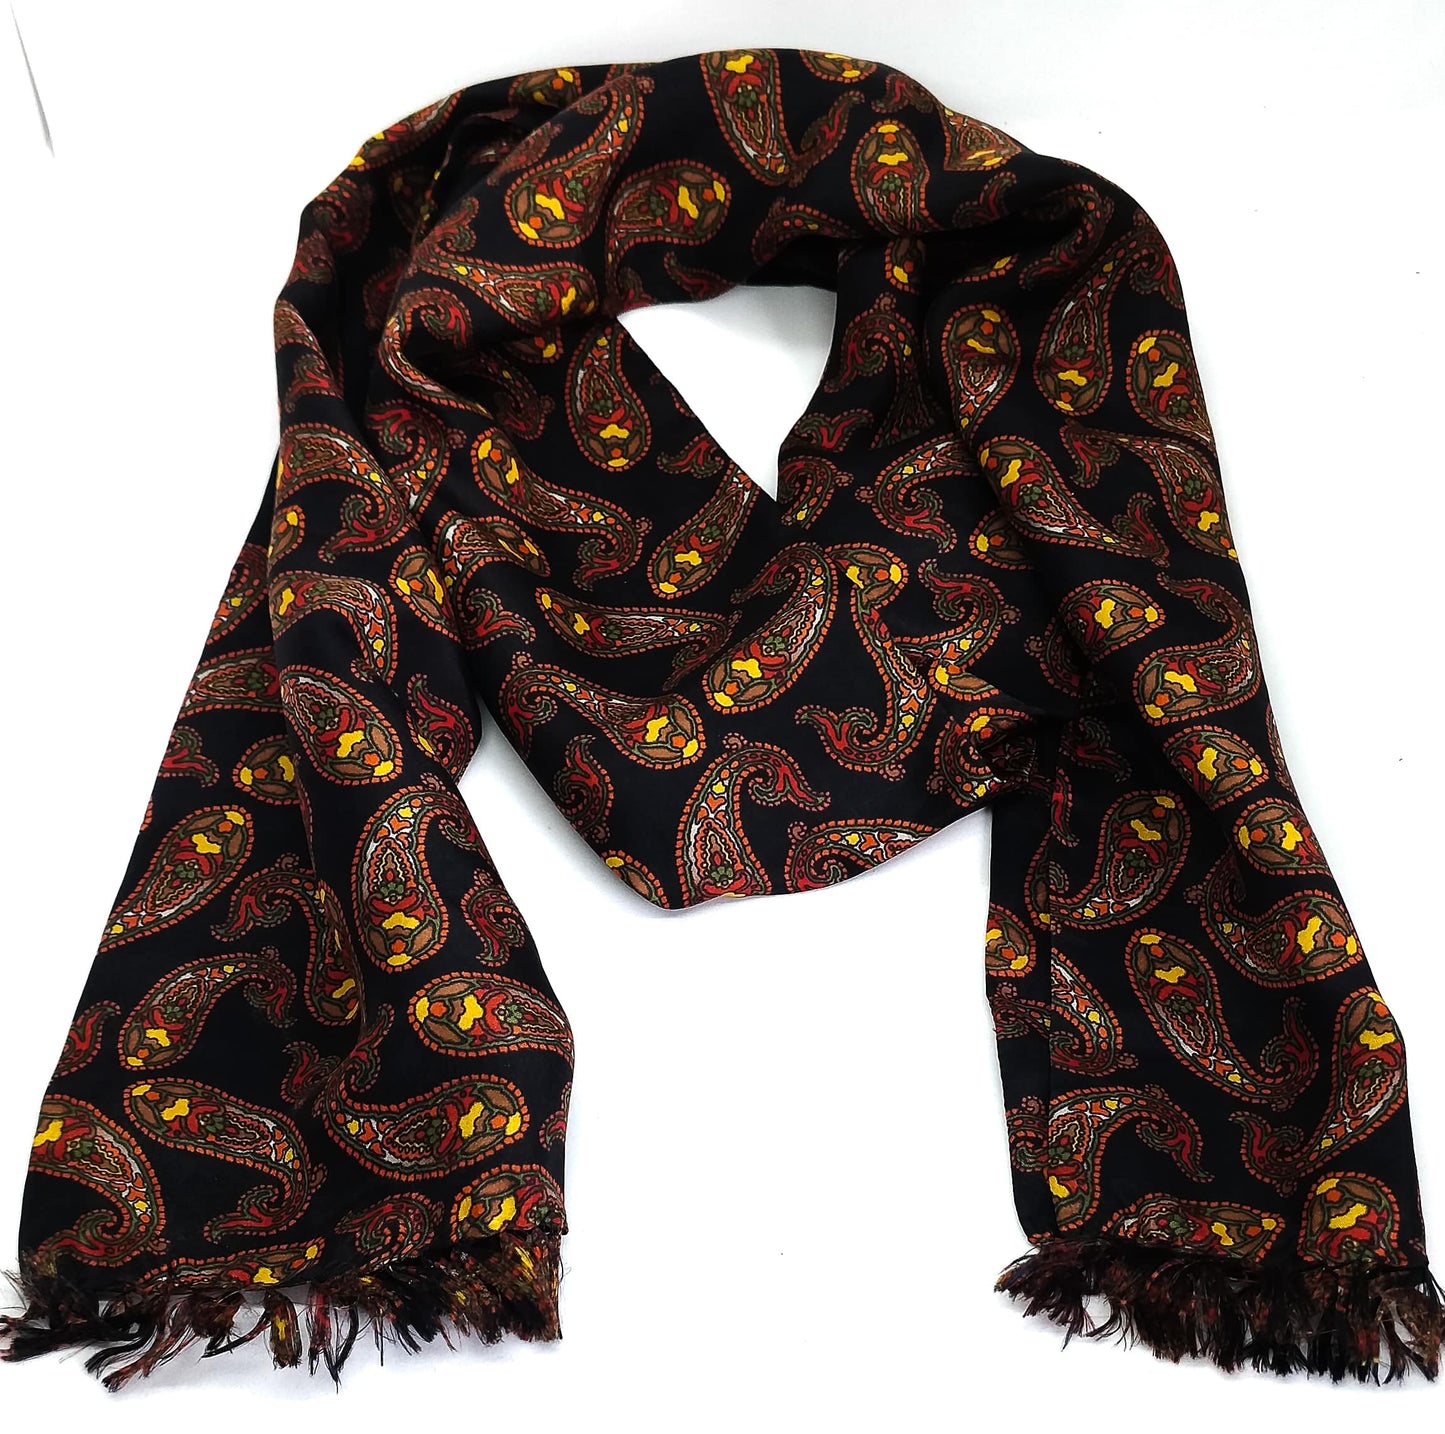 New Arrival Golden Paisley Scarf